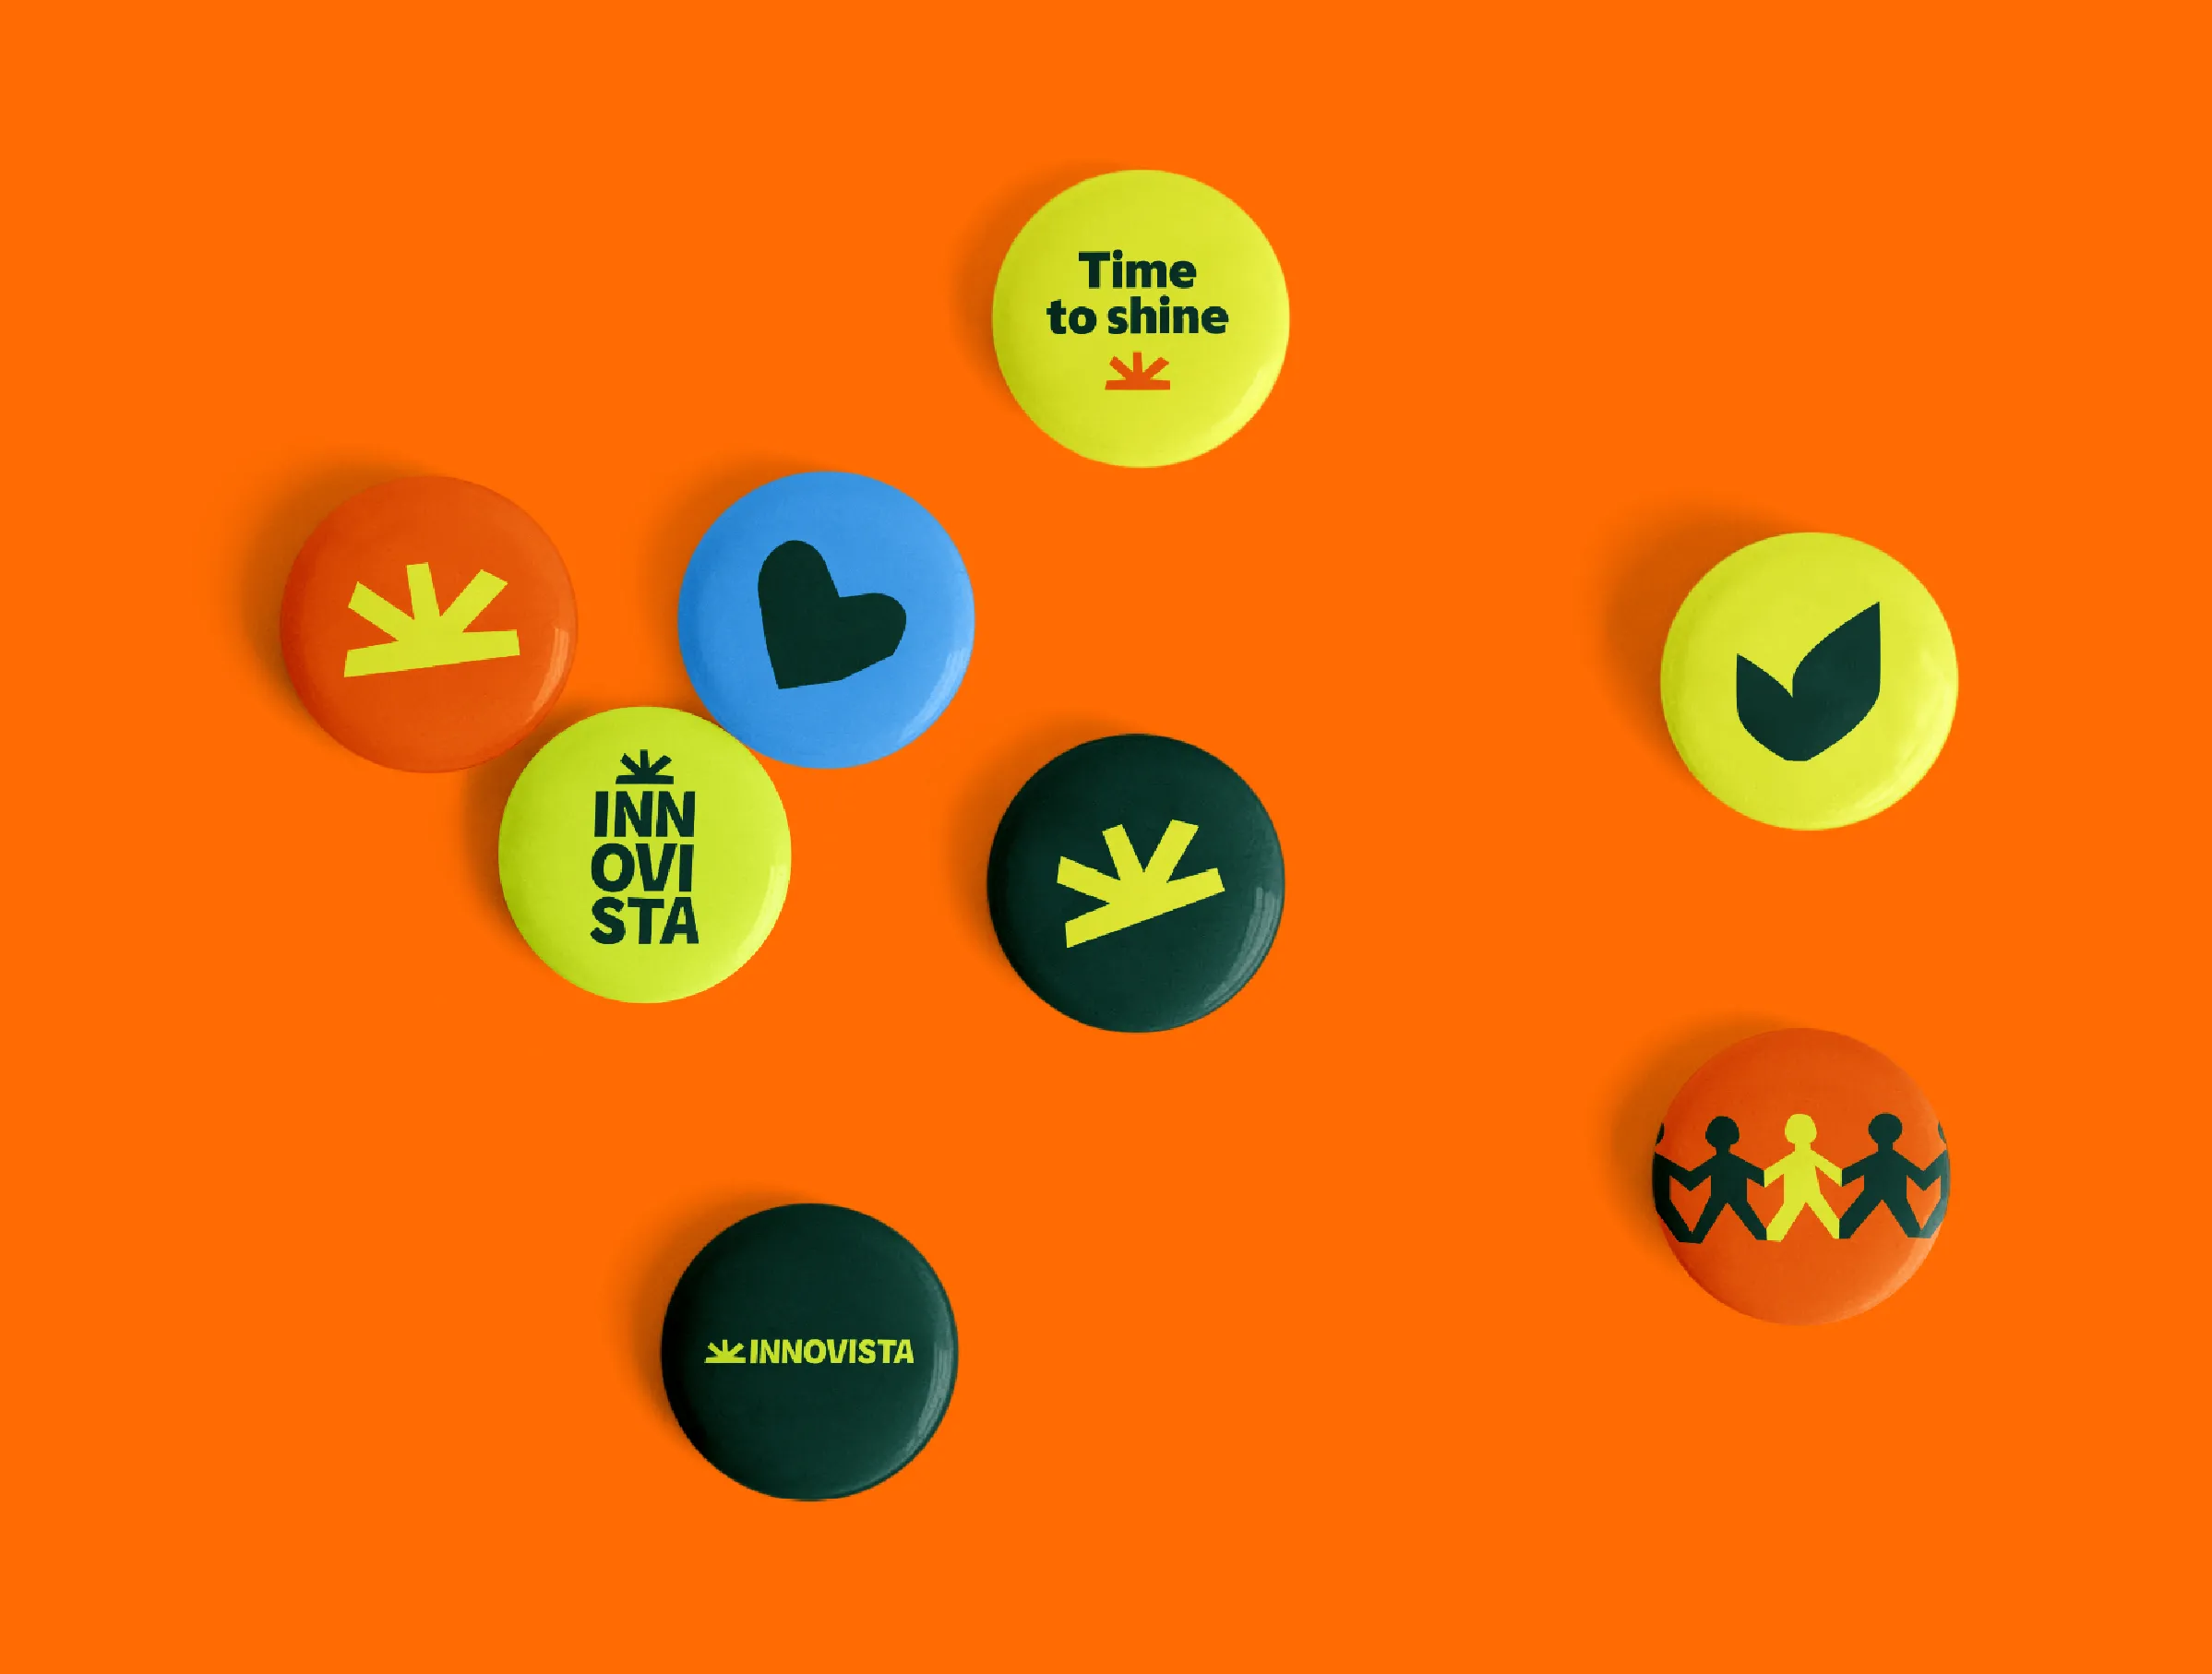 A set of small round badges on a bright orange background. The badges feature the Innovista sunrise icon, other cut-out style shapes, and the charity's logo